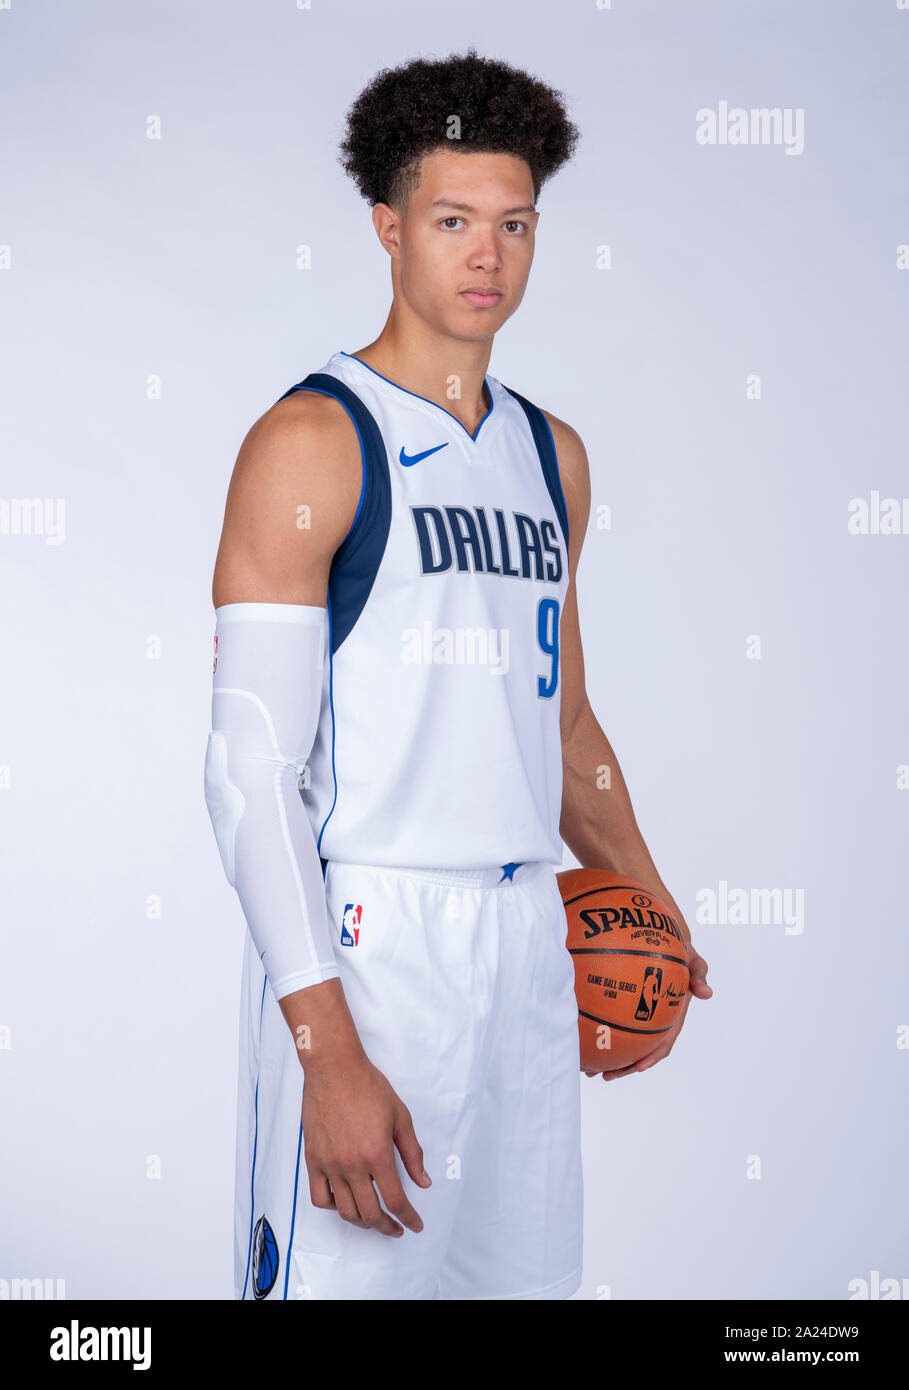 Sept 30, 2019: Dallas Mavericks forward Isaiah Roby #9 poses during the Dallas  Mavericks Media Day held at the American Airlines Center in Dallas, TX  Stock Photo - Alamy